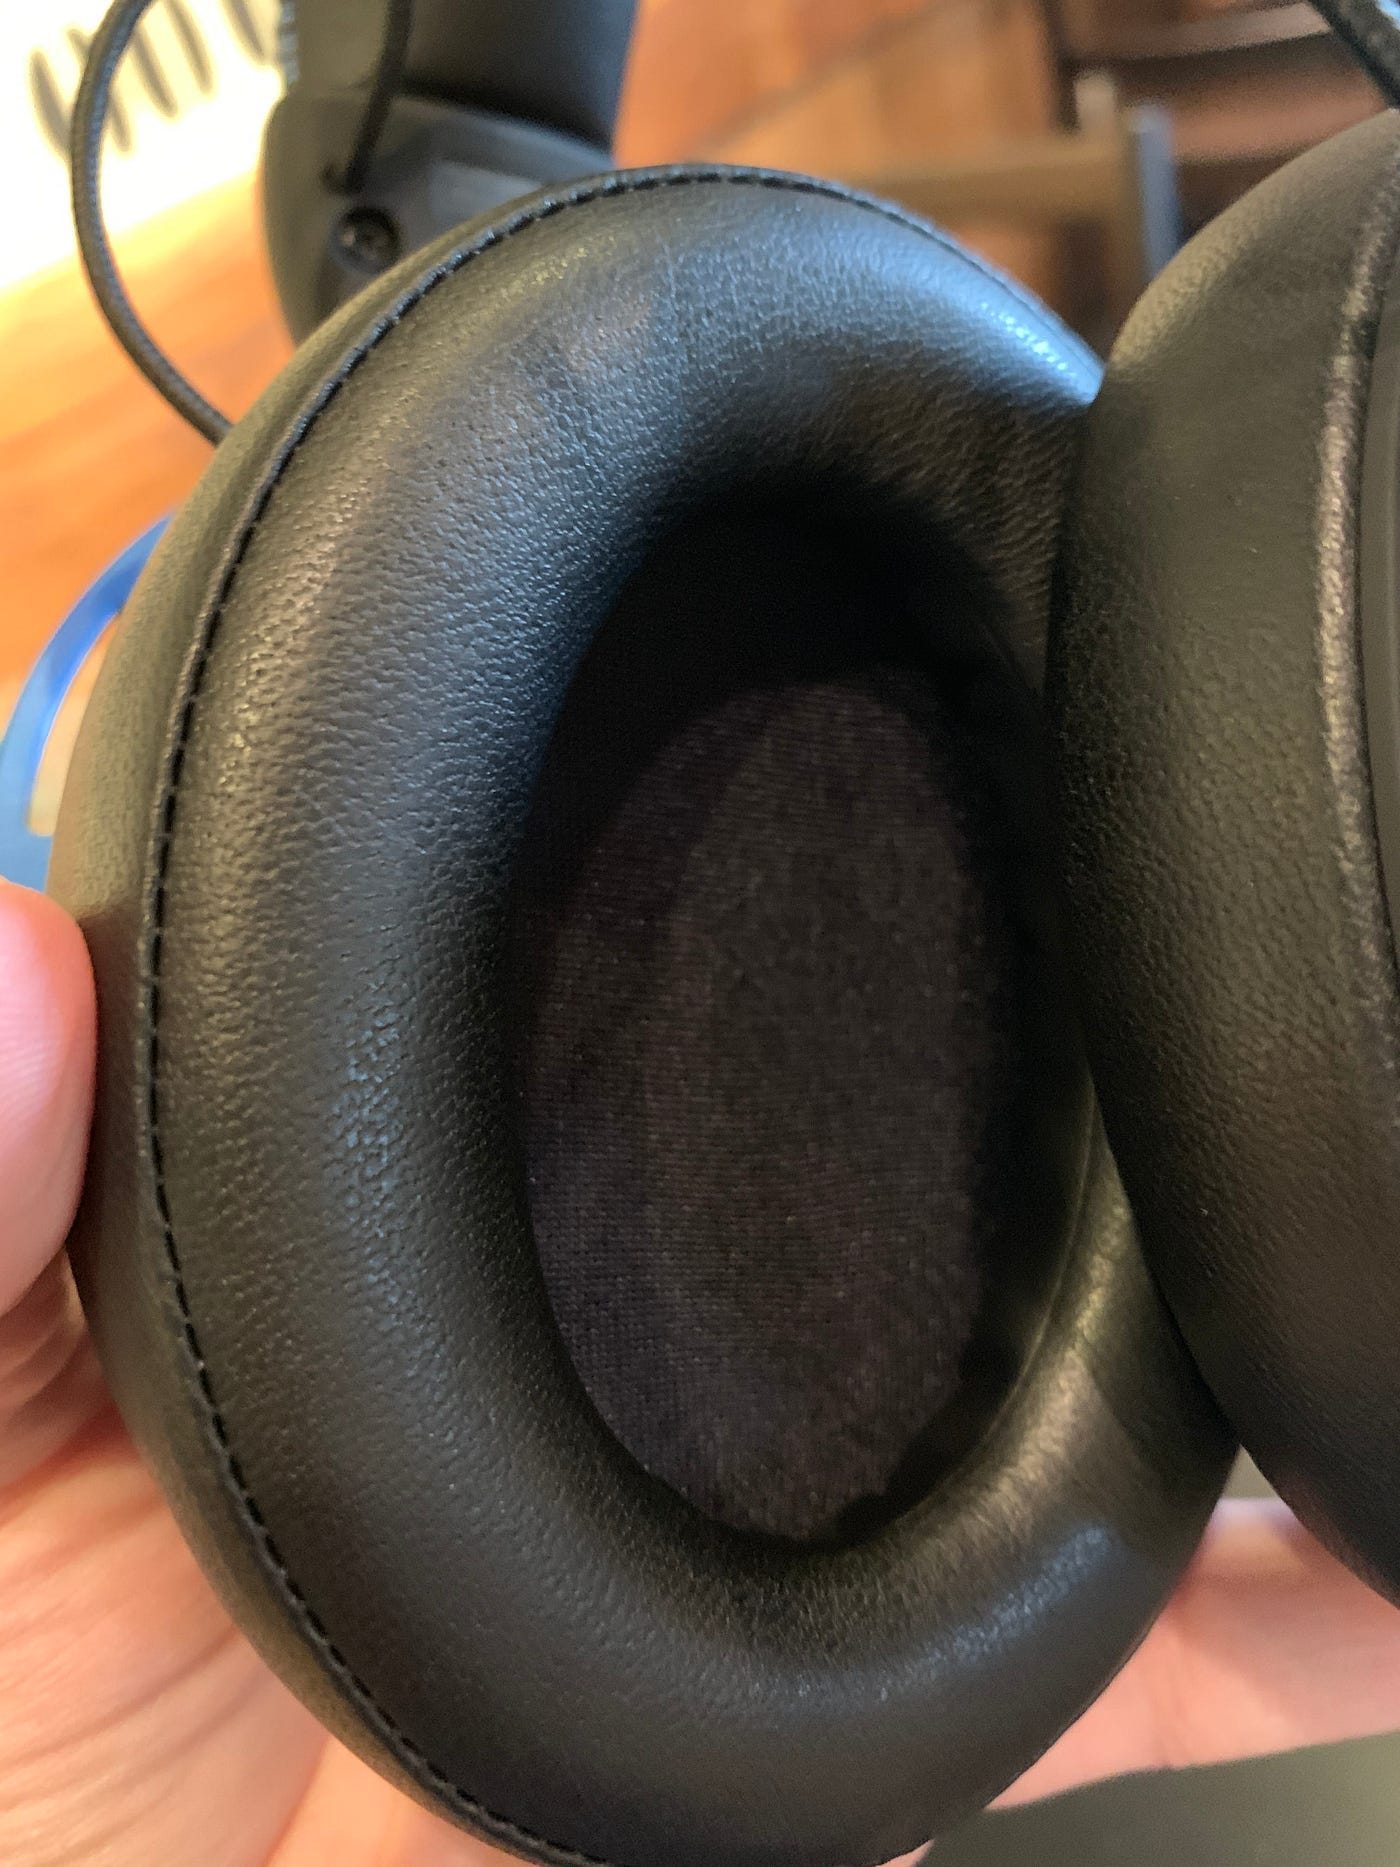 The HyperX Cloud Alpha Wireless Has Issues, by Alex Rowe